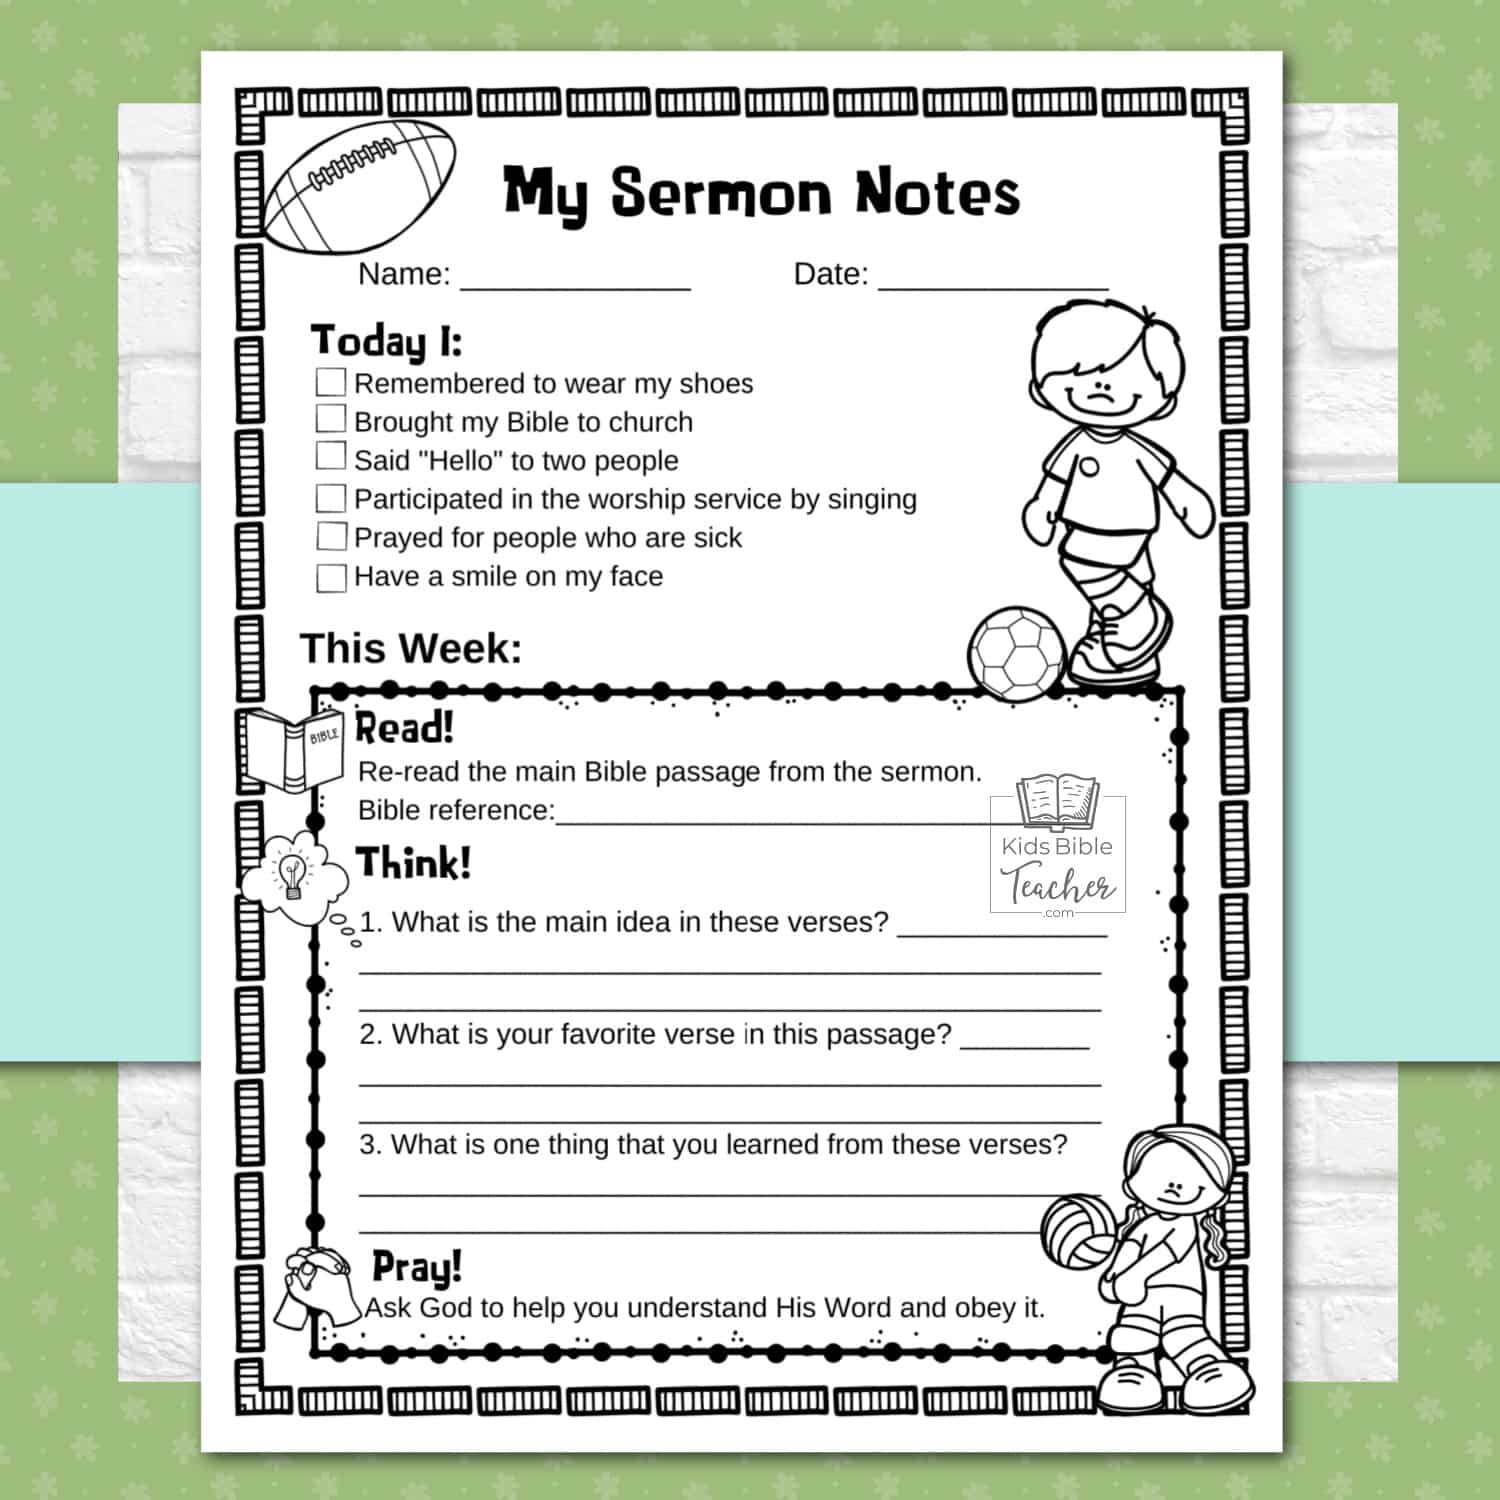 Summer Sermon Notes Page image of front of page with "Today I" and "This Week" sections